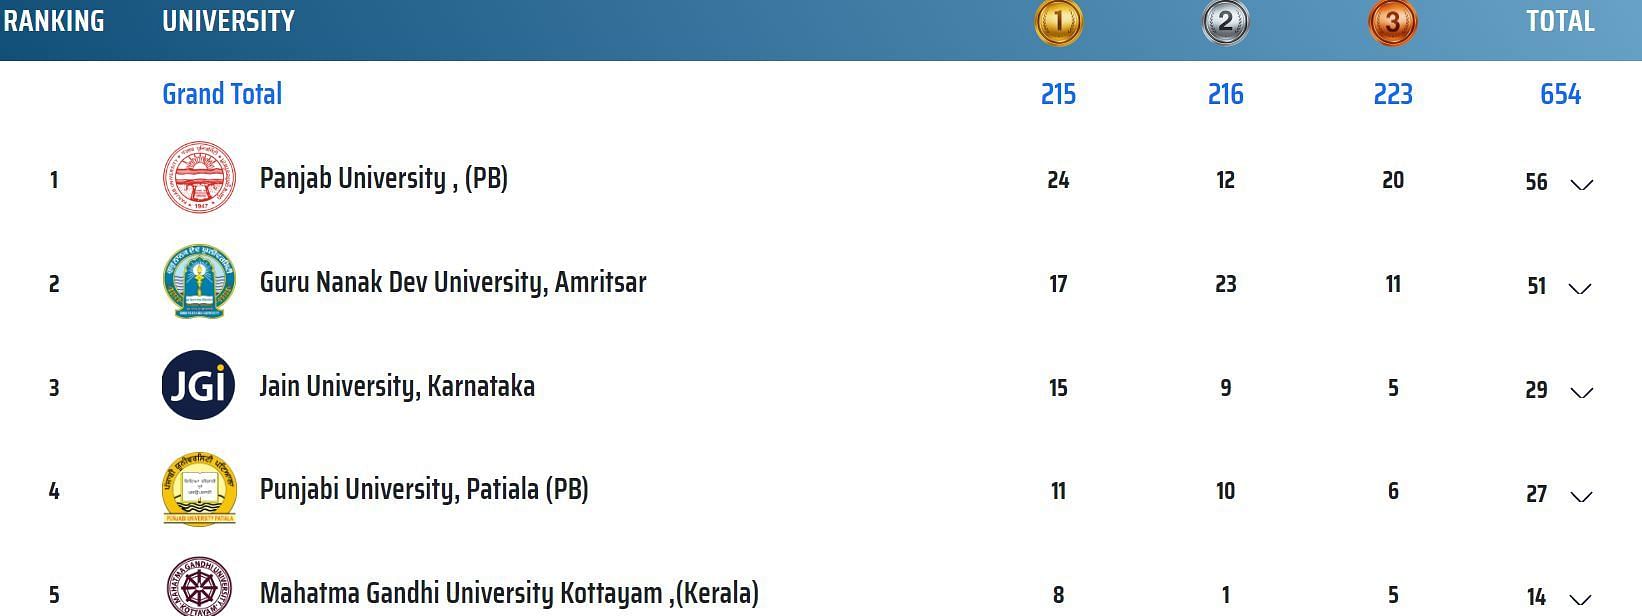 Khelo India University Games 2023 medals tally - full list of winners